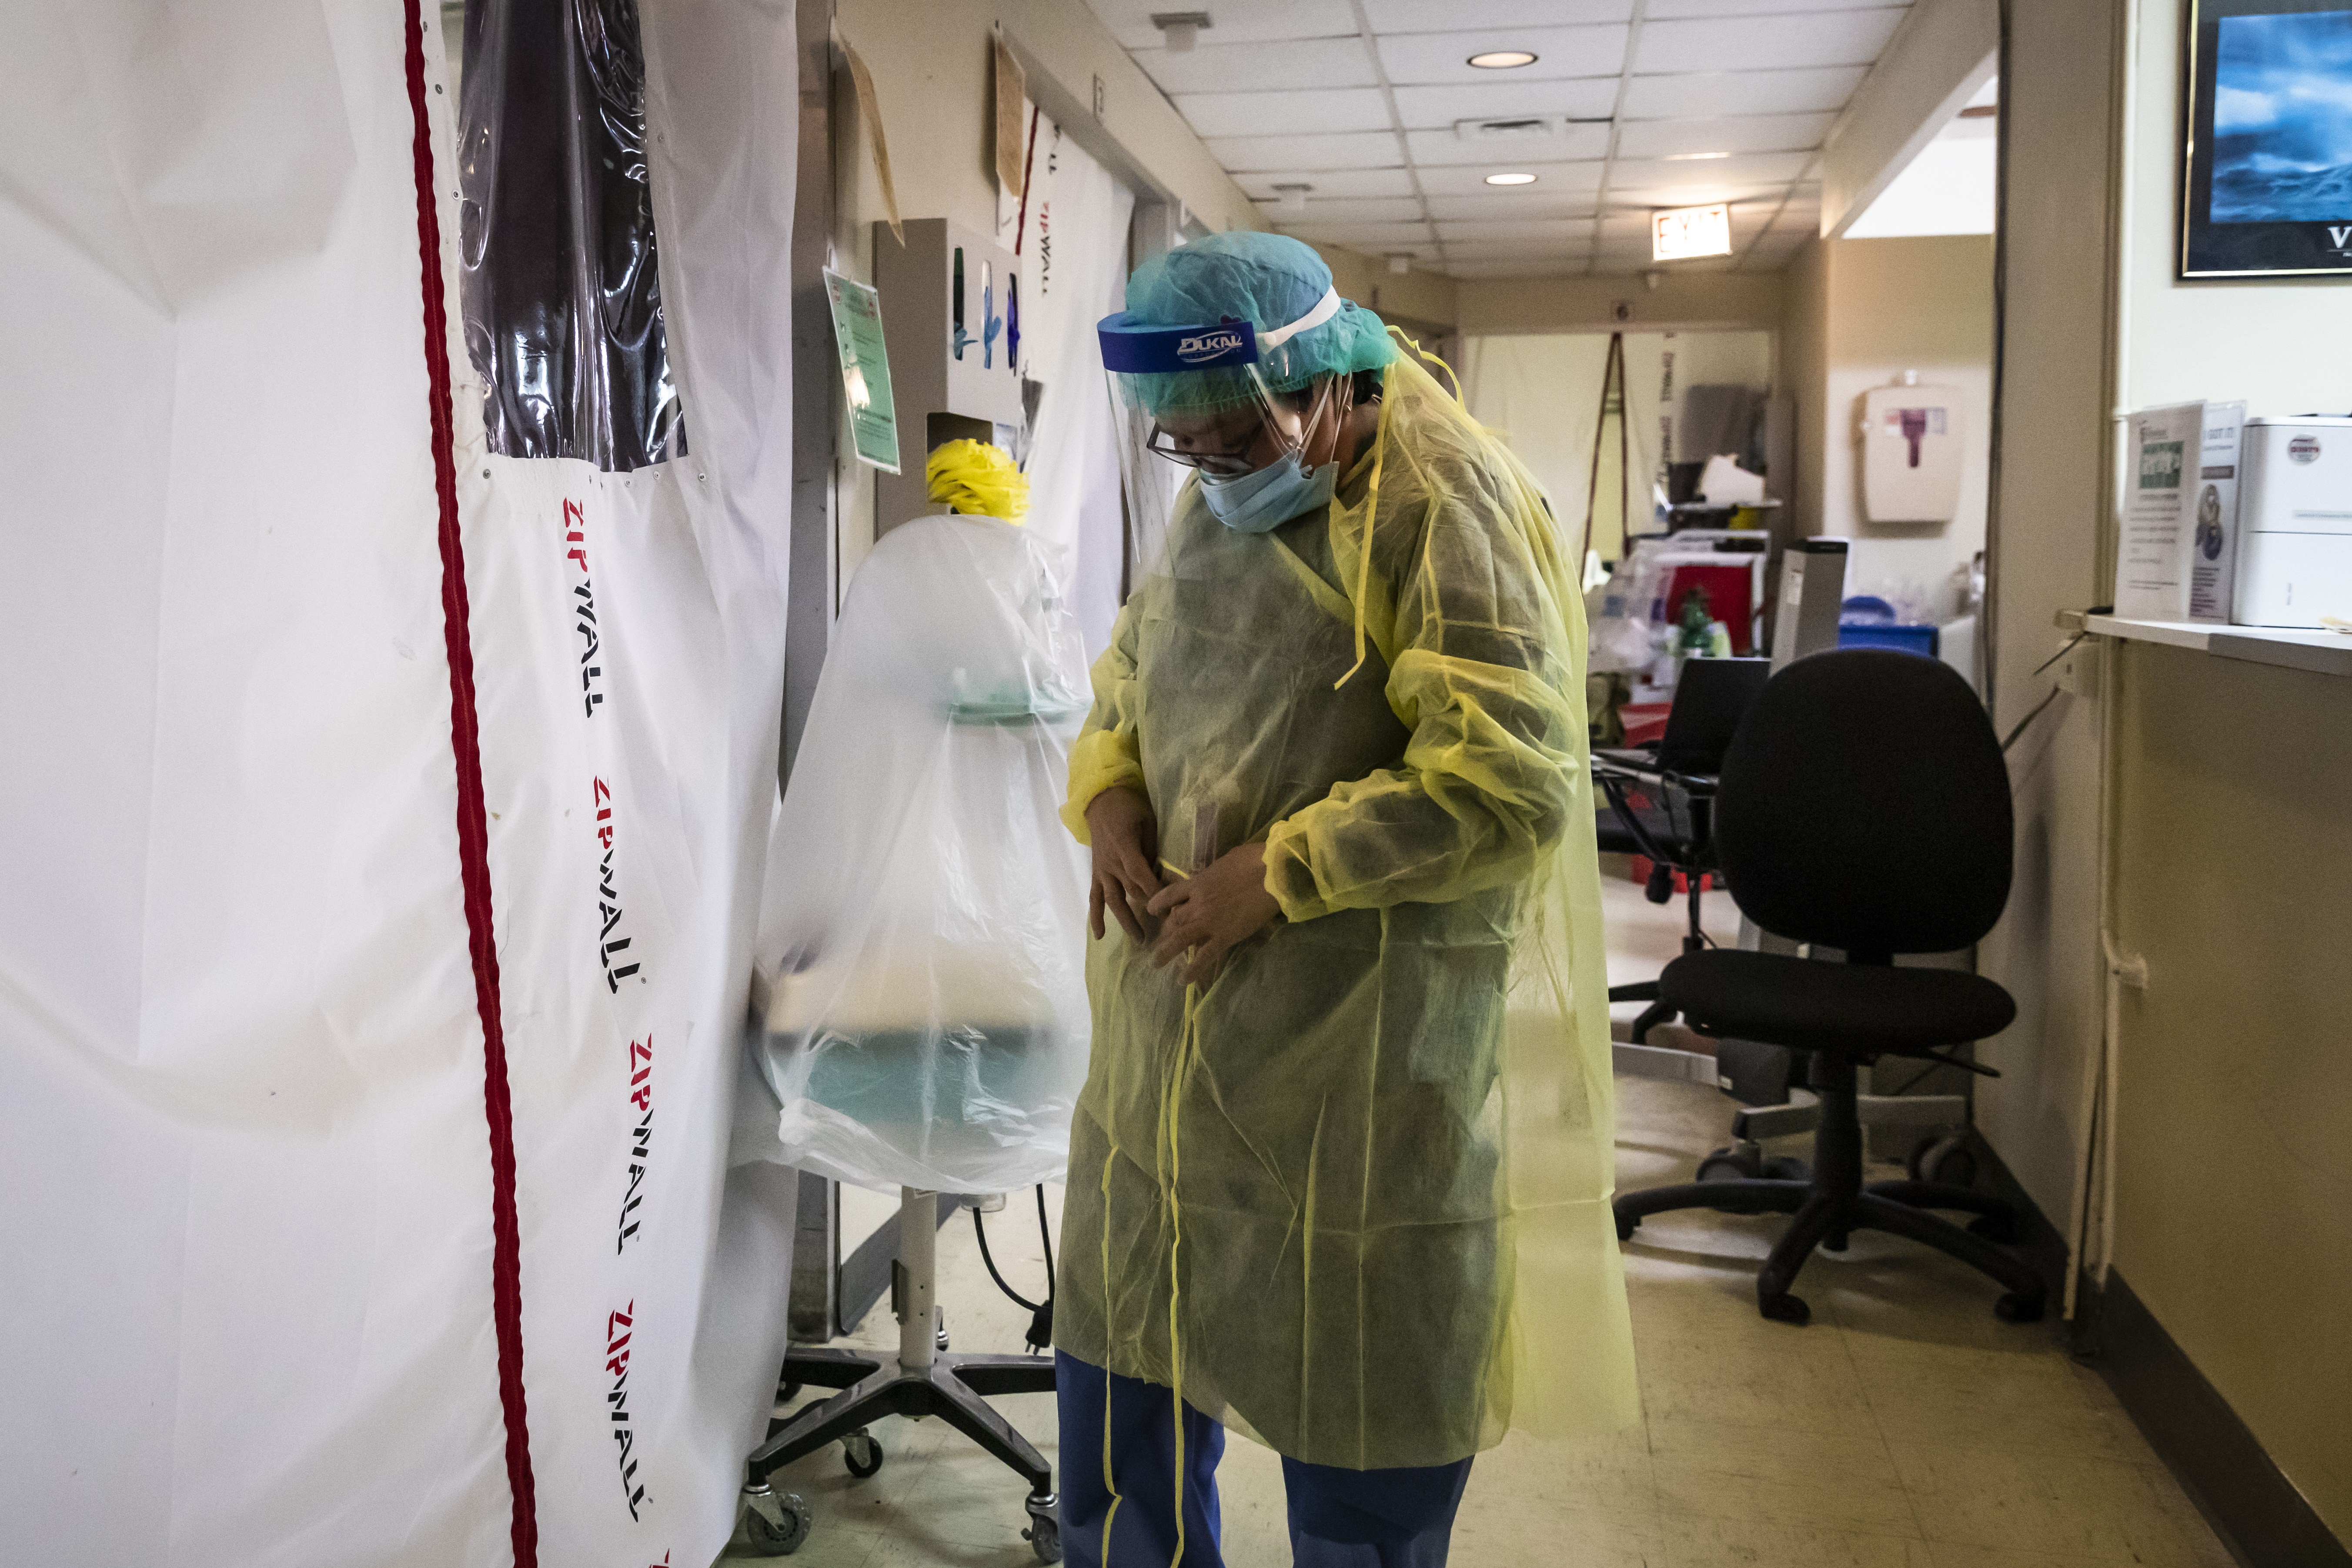 Nurse Alma Abad puts on new personal protective equipment as she prepares to check on a patient, a 59-year-old woman with COVID-19, in the Intensive Care Unit at Roseland Community Hospital earlier this month.